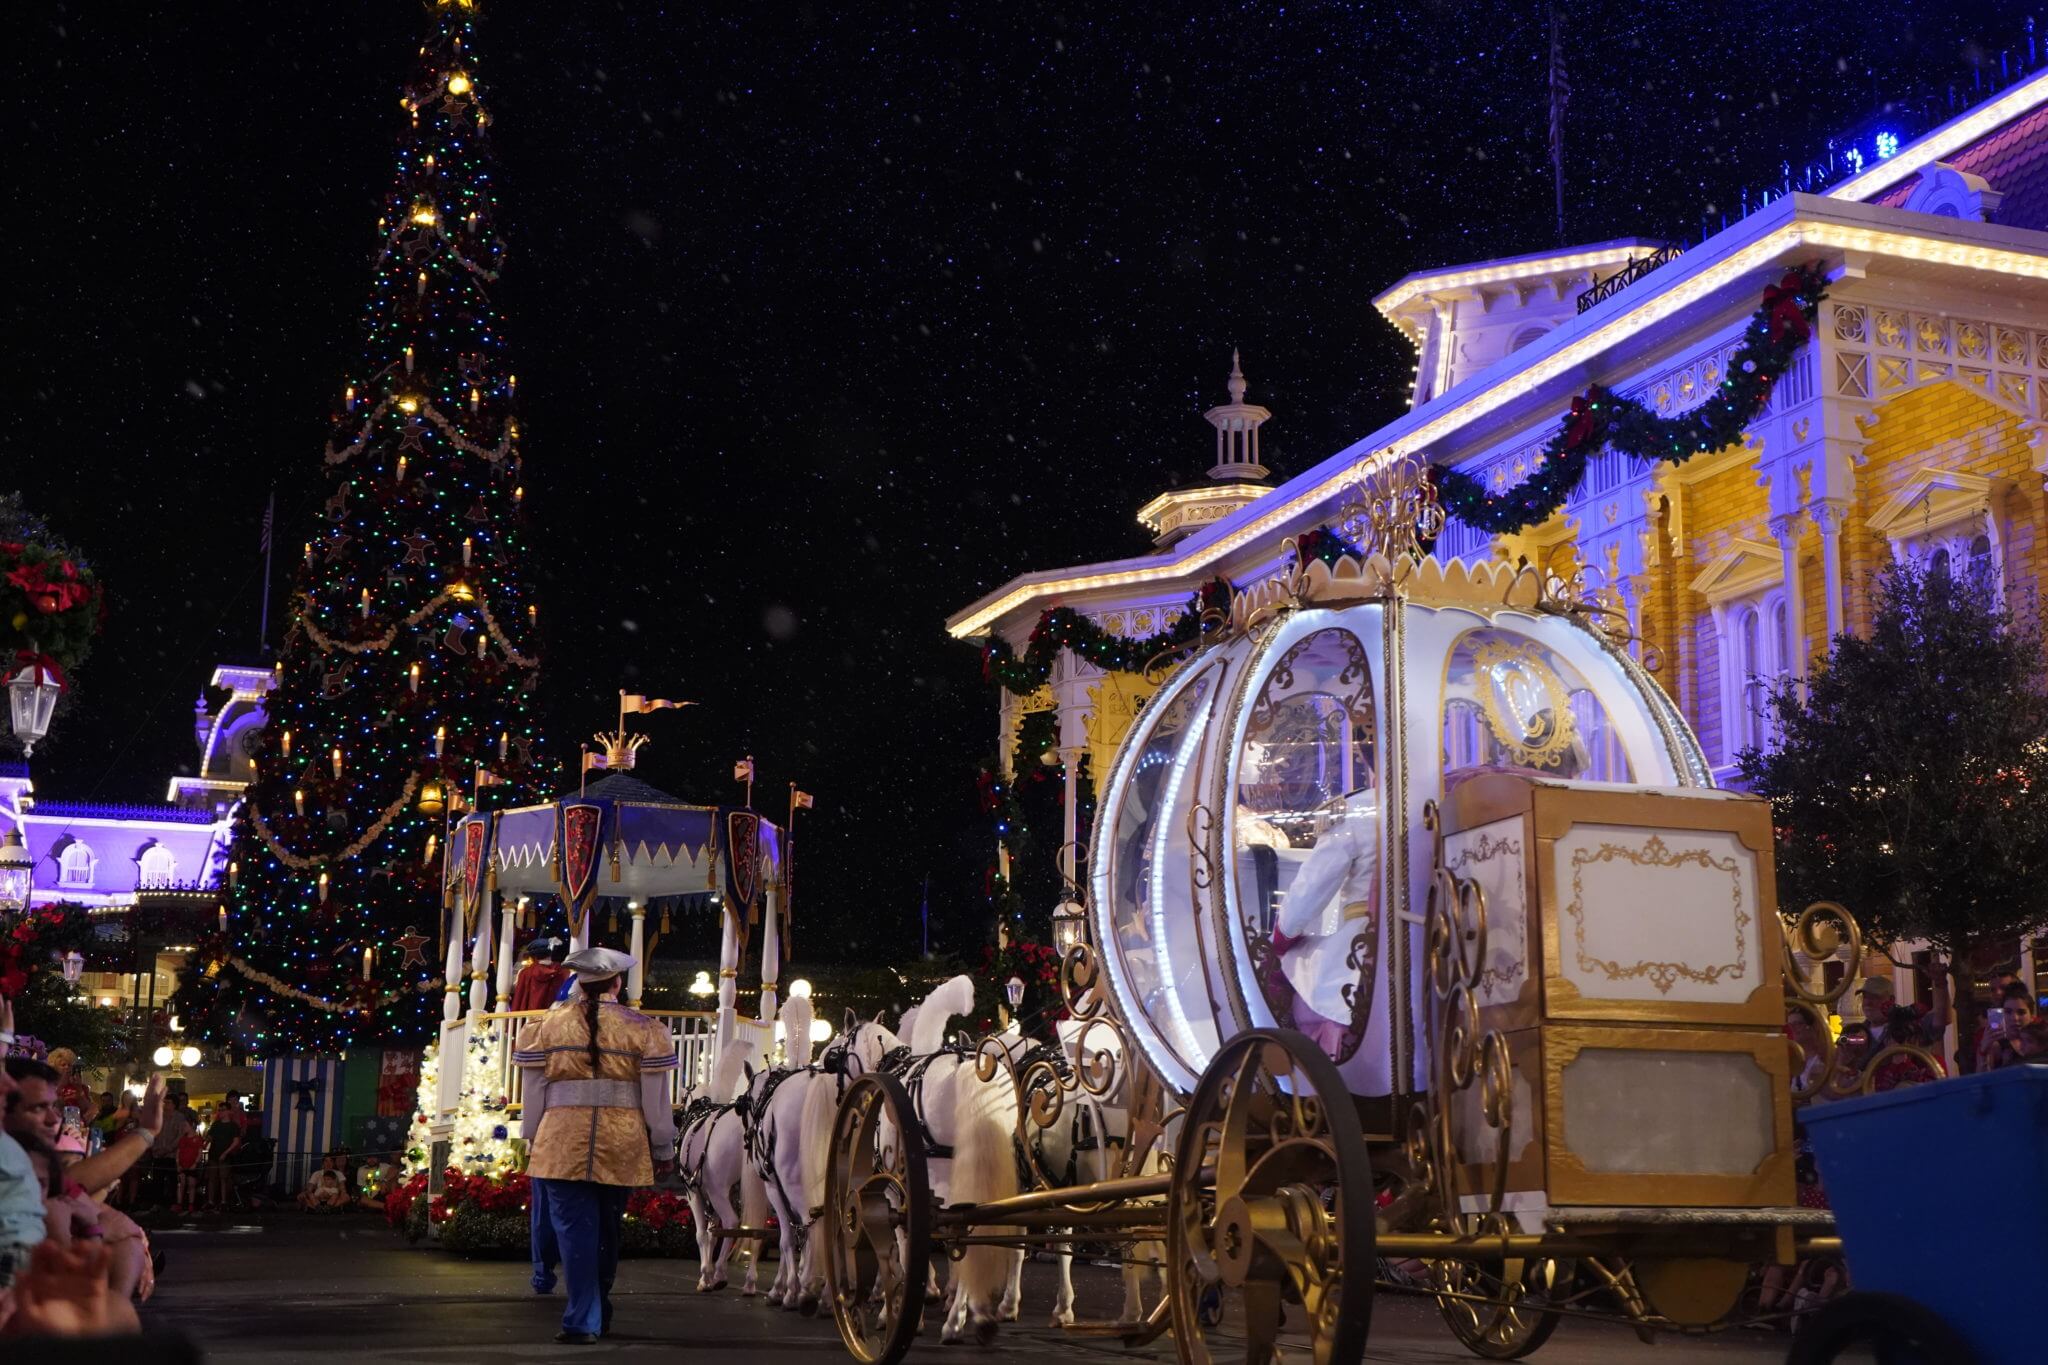 Cinderella Carriage and Christmas Tree in Once Upon a Christmastime Parade on Main Street USA in Disney World